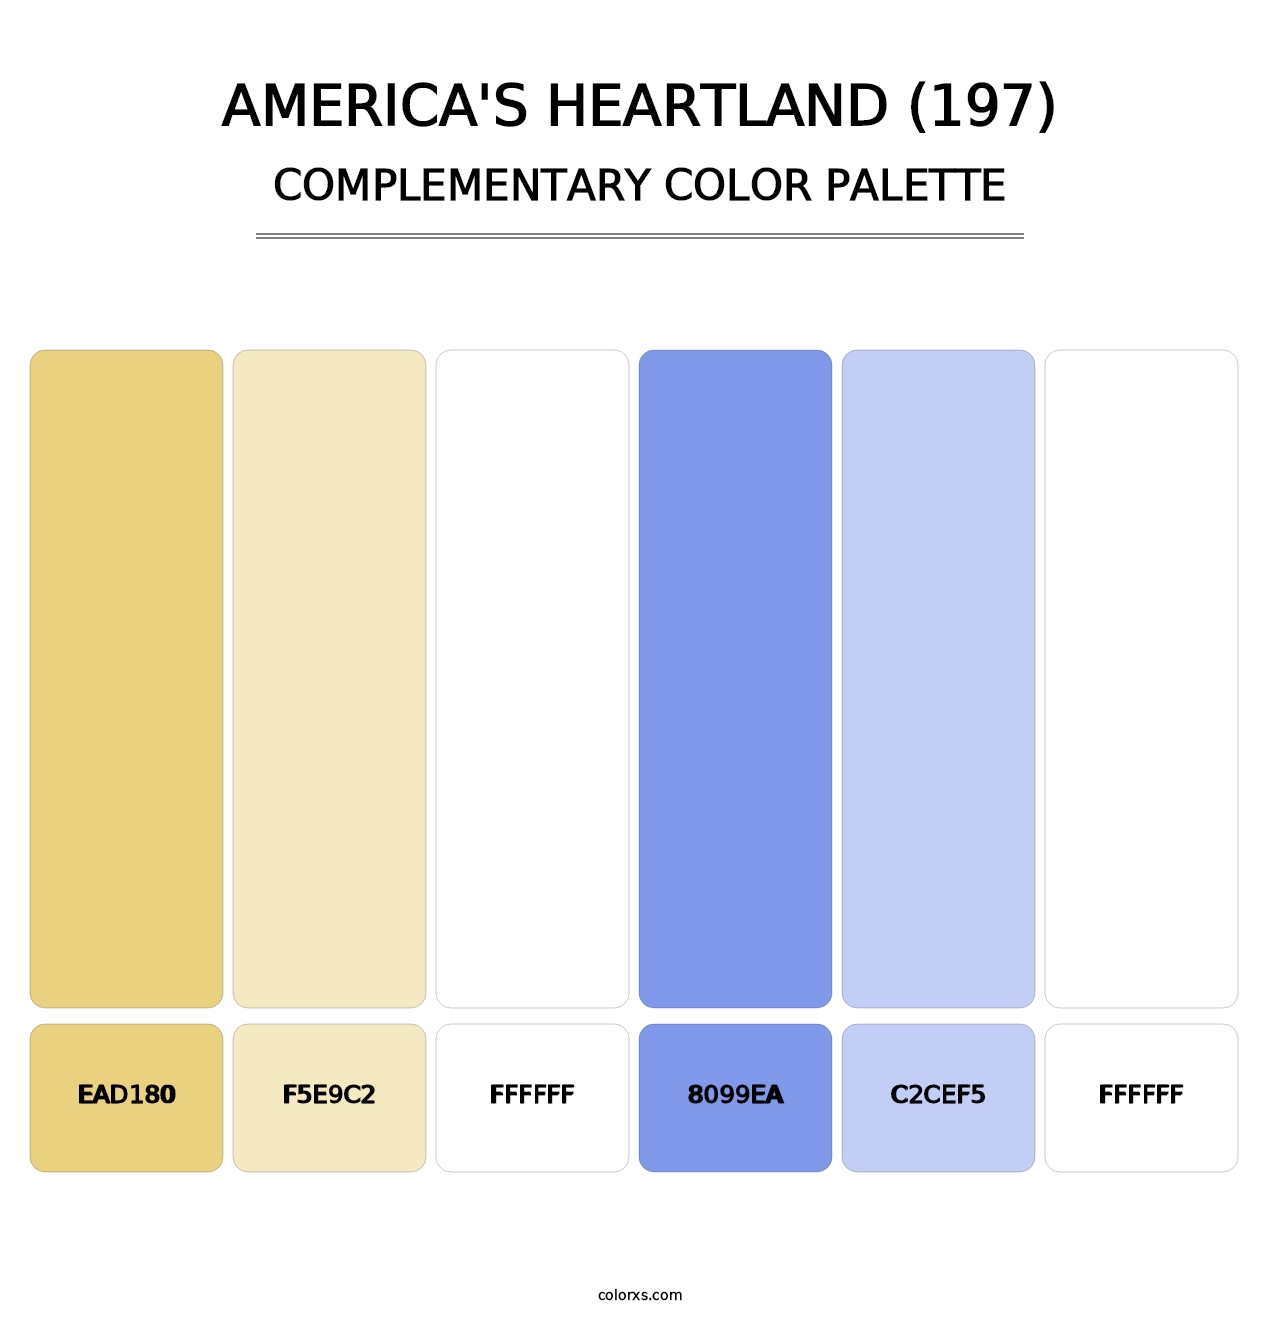 America's Heartland (197) - Complementary Color Palette